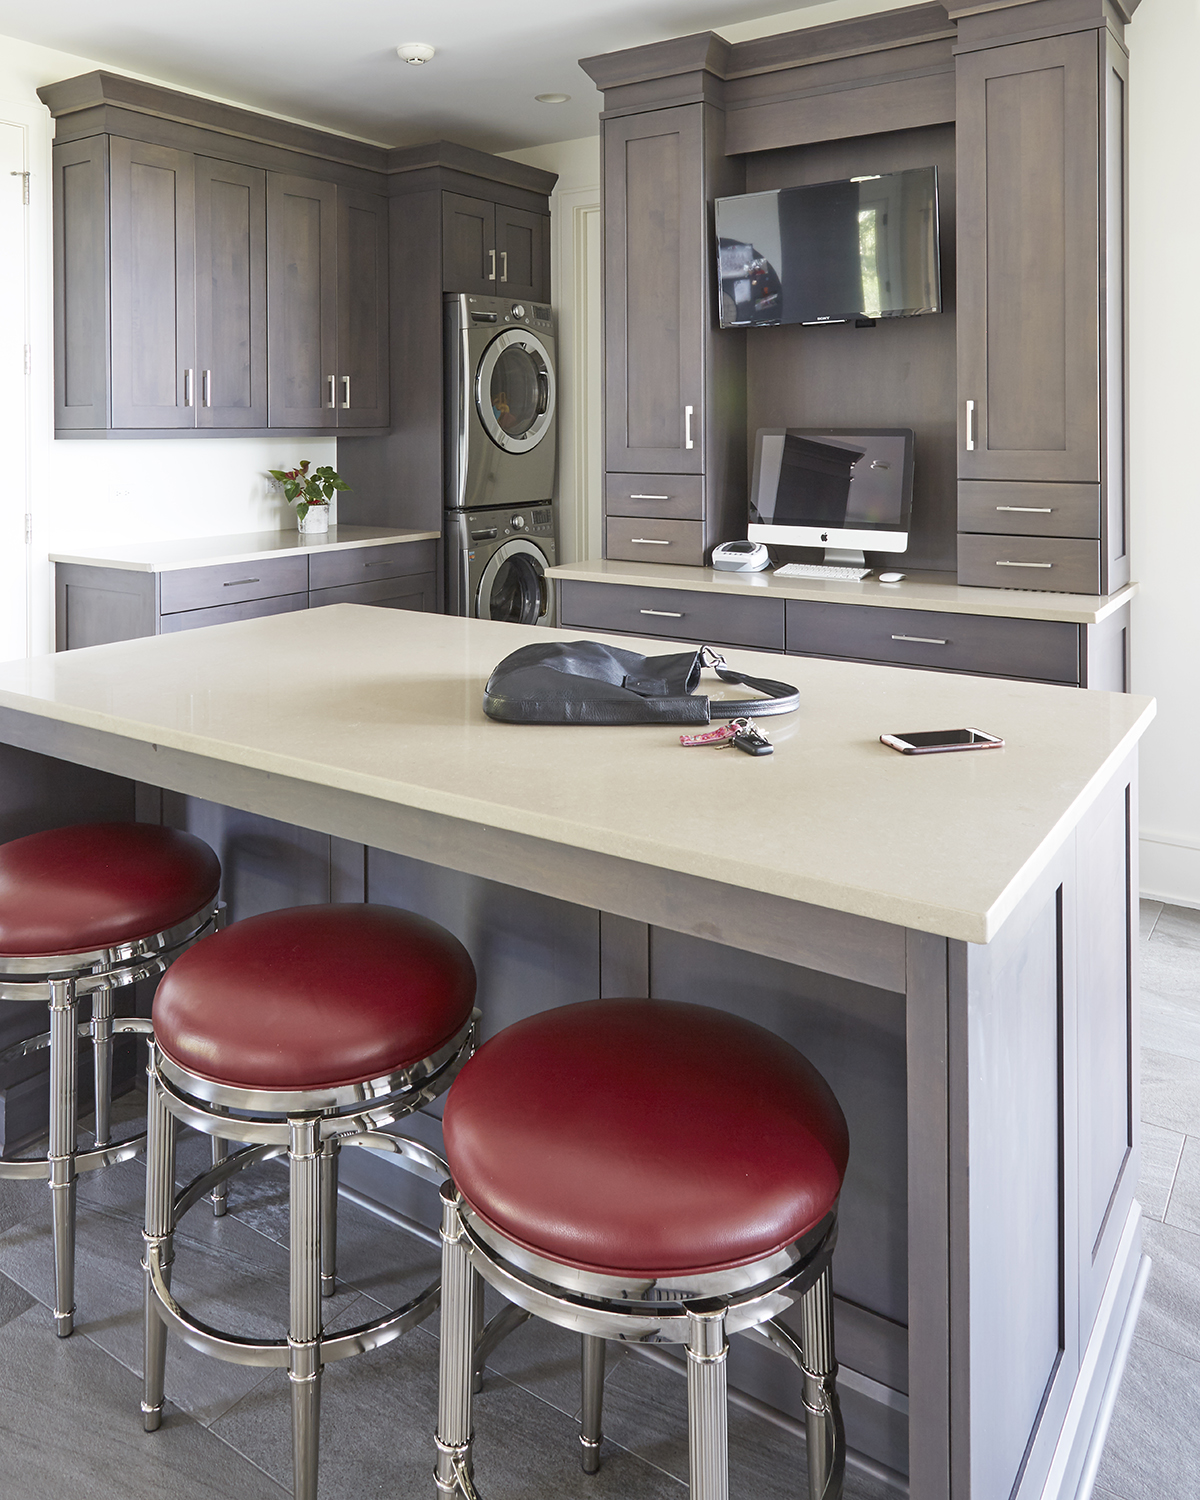 red stools in laundry room